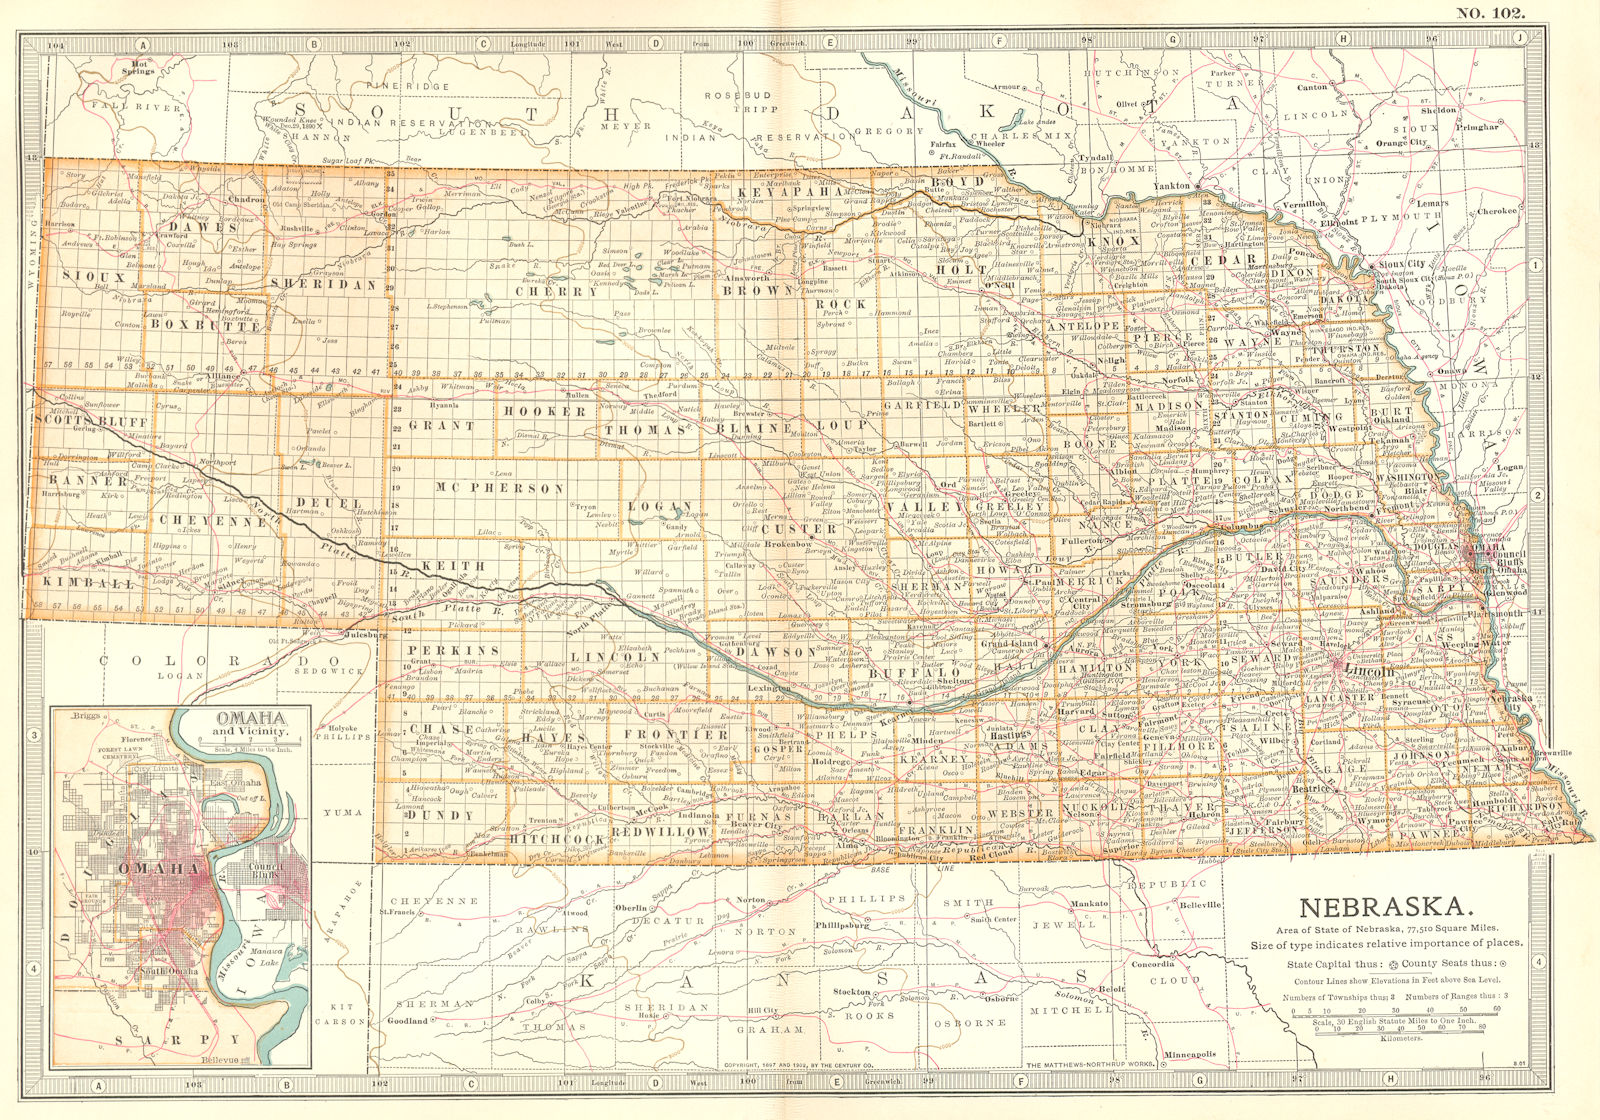 NEBRASKA. State map showing counties. Inset Omaha & area. Britannica 1903